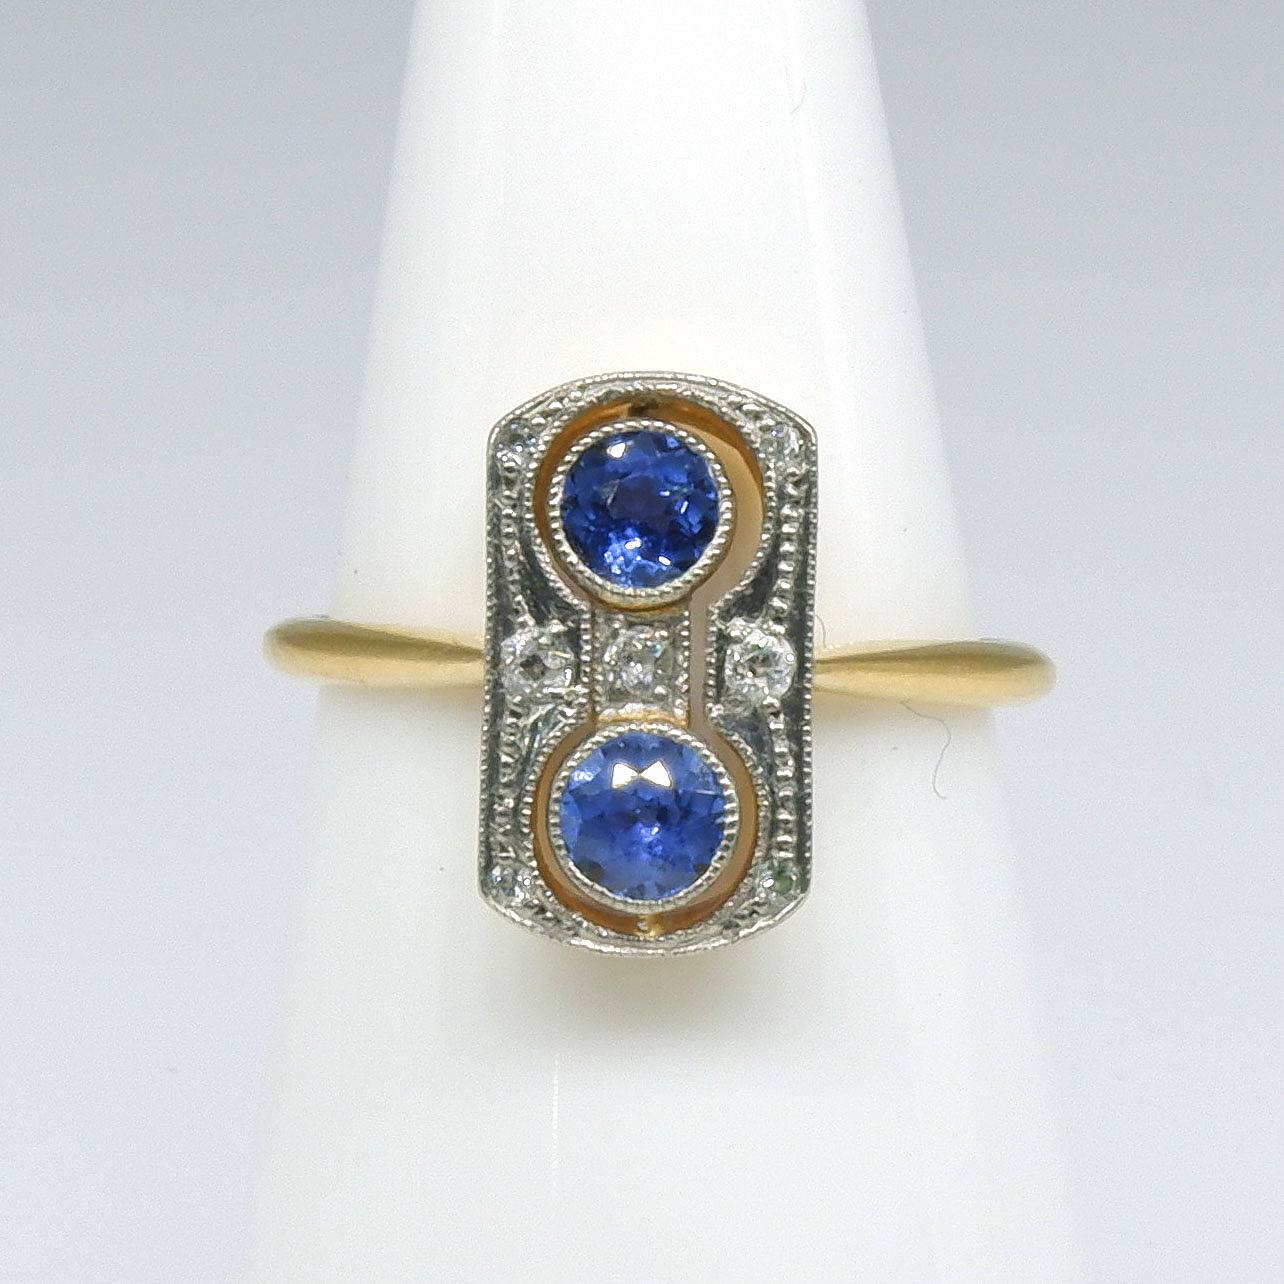 'Art Deco 18ct Yellow and White Gold Sapphire and Diamond Ring'